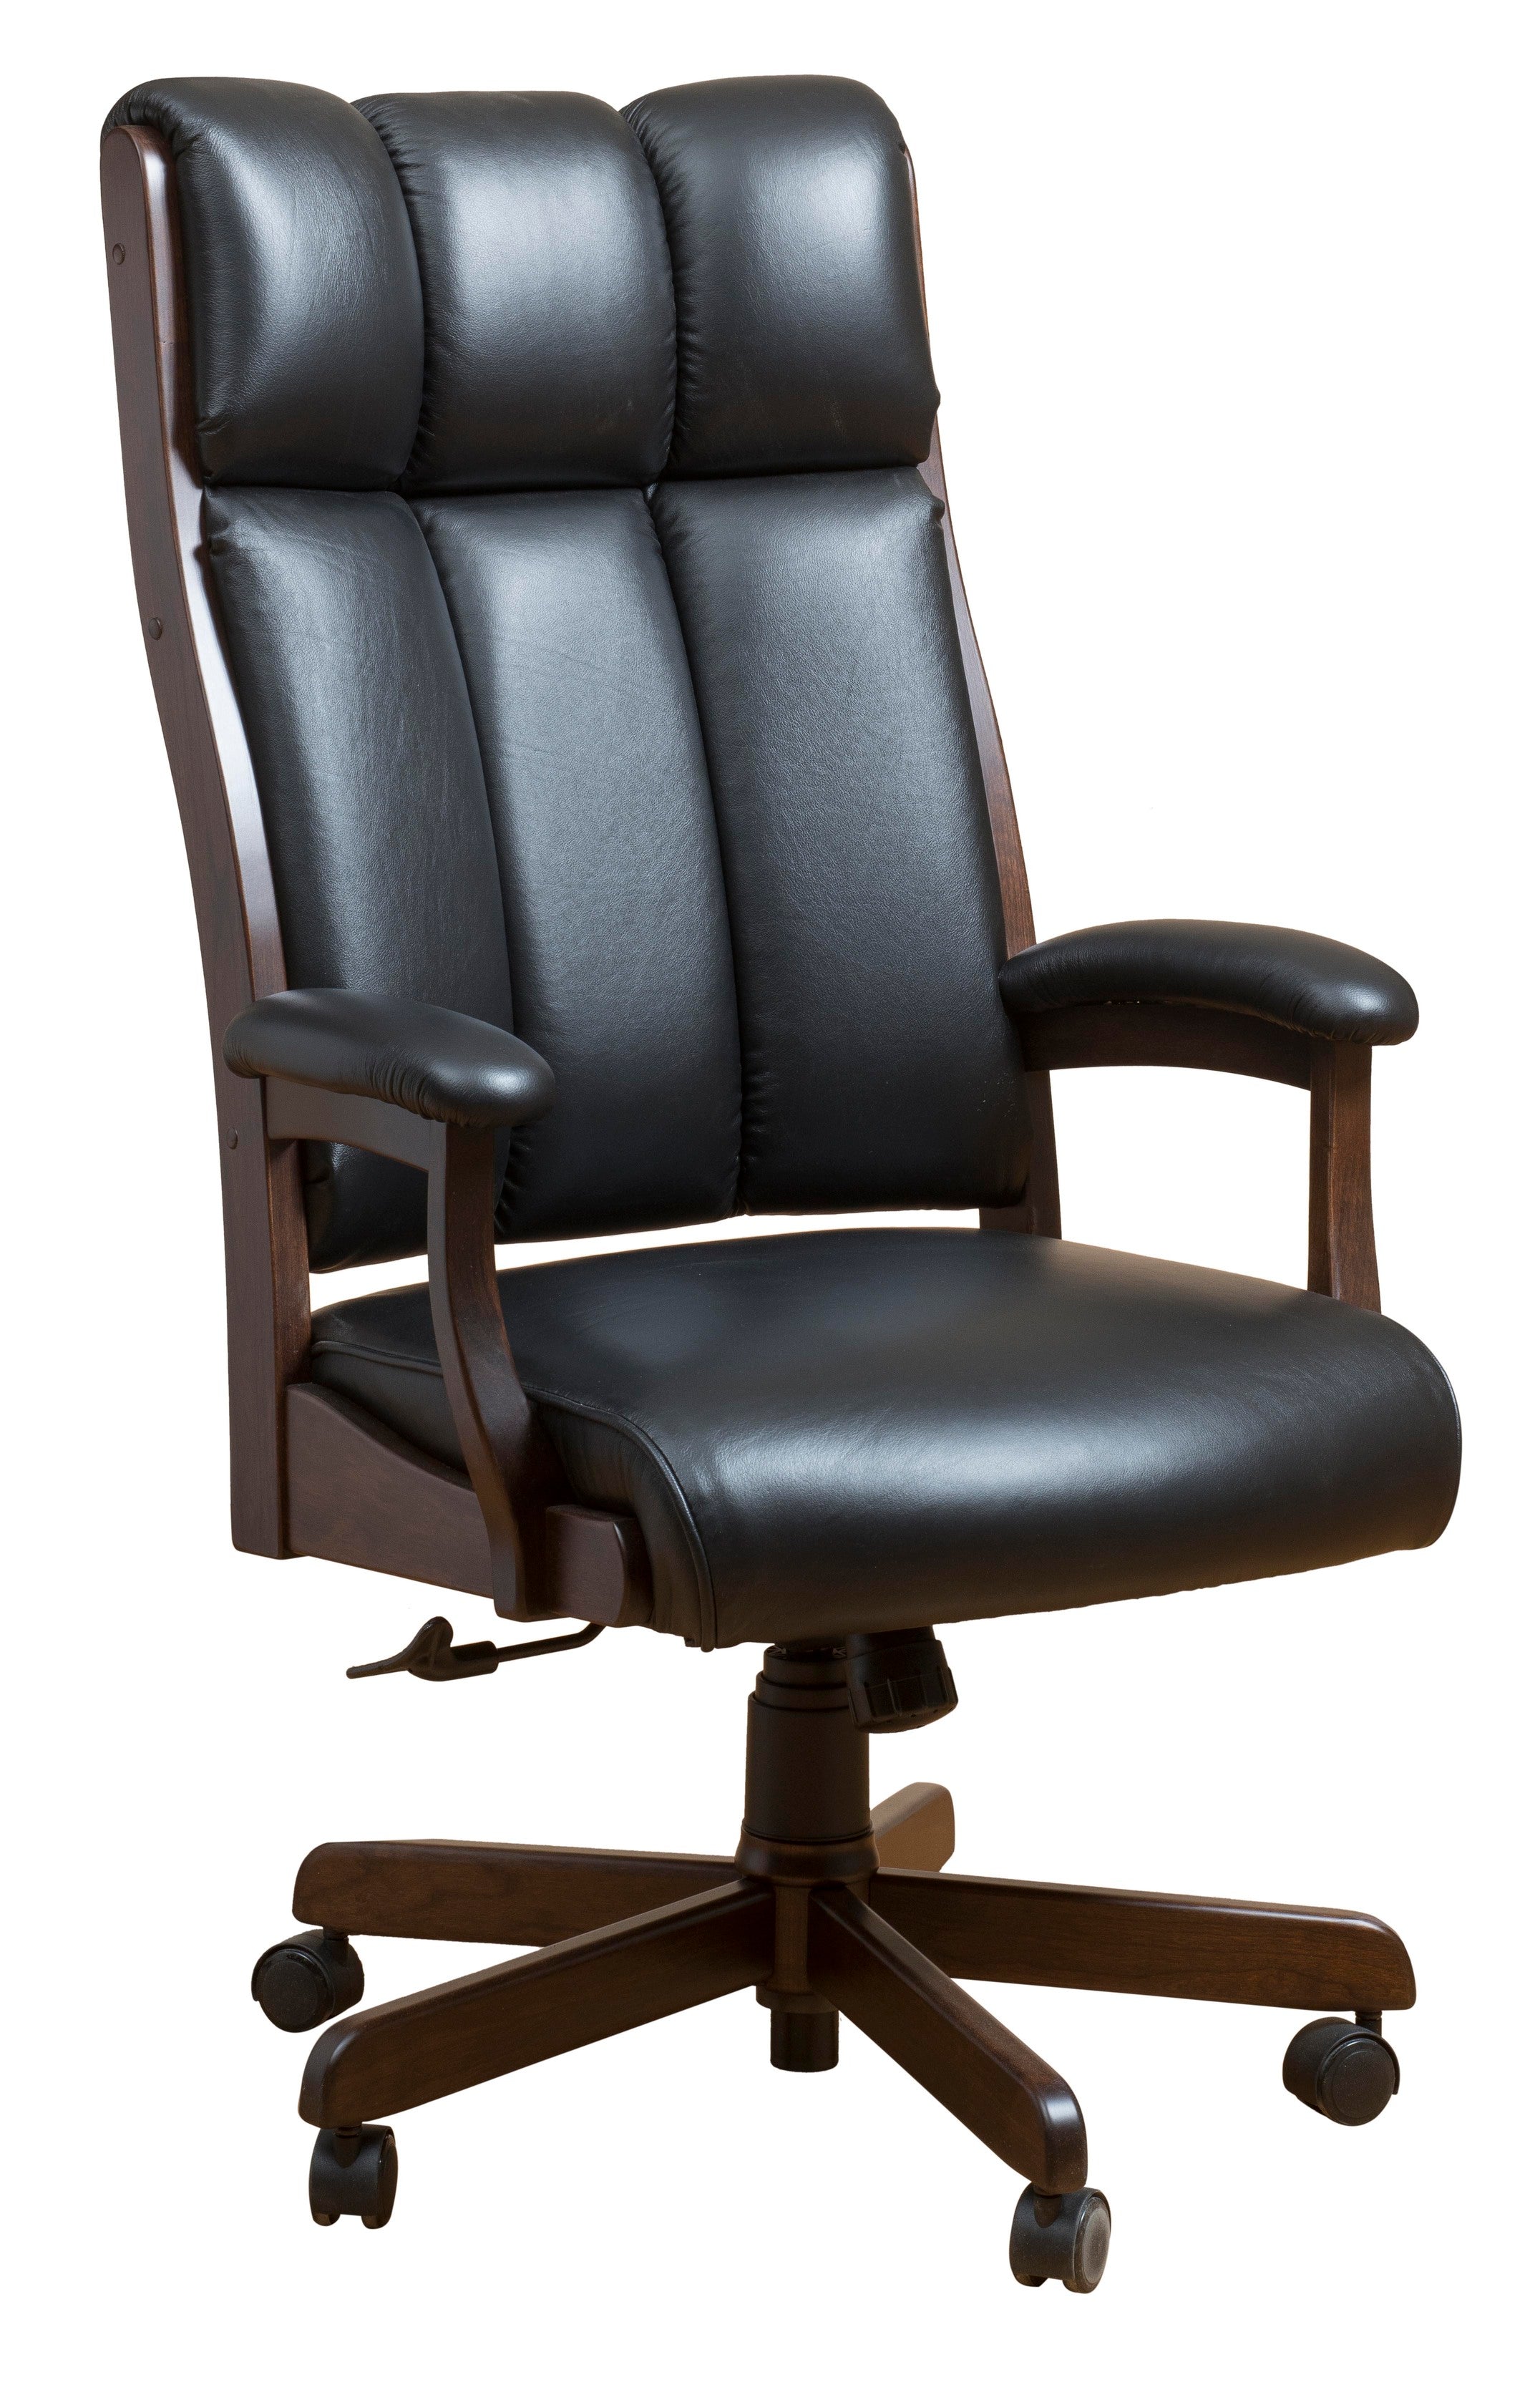 Amish Conference Desk Chair